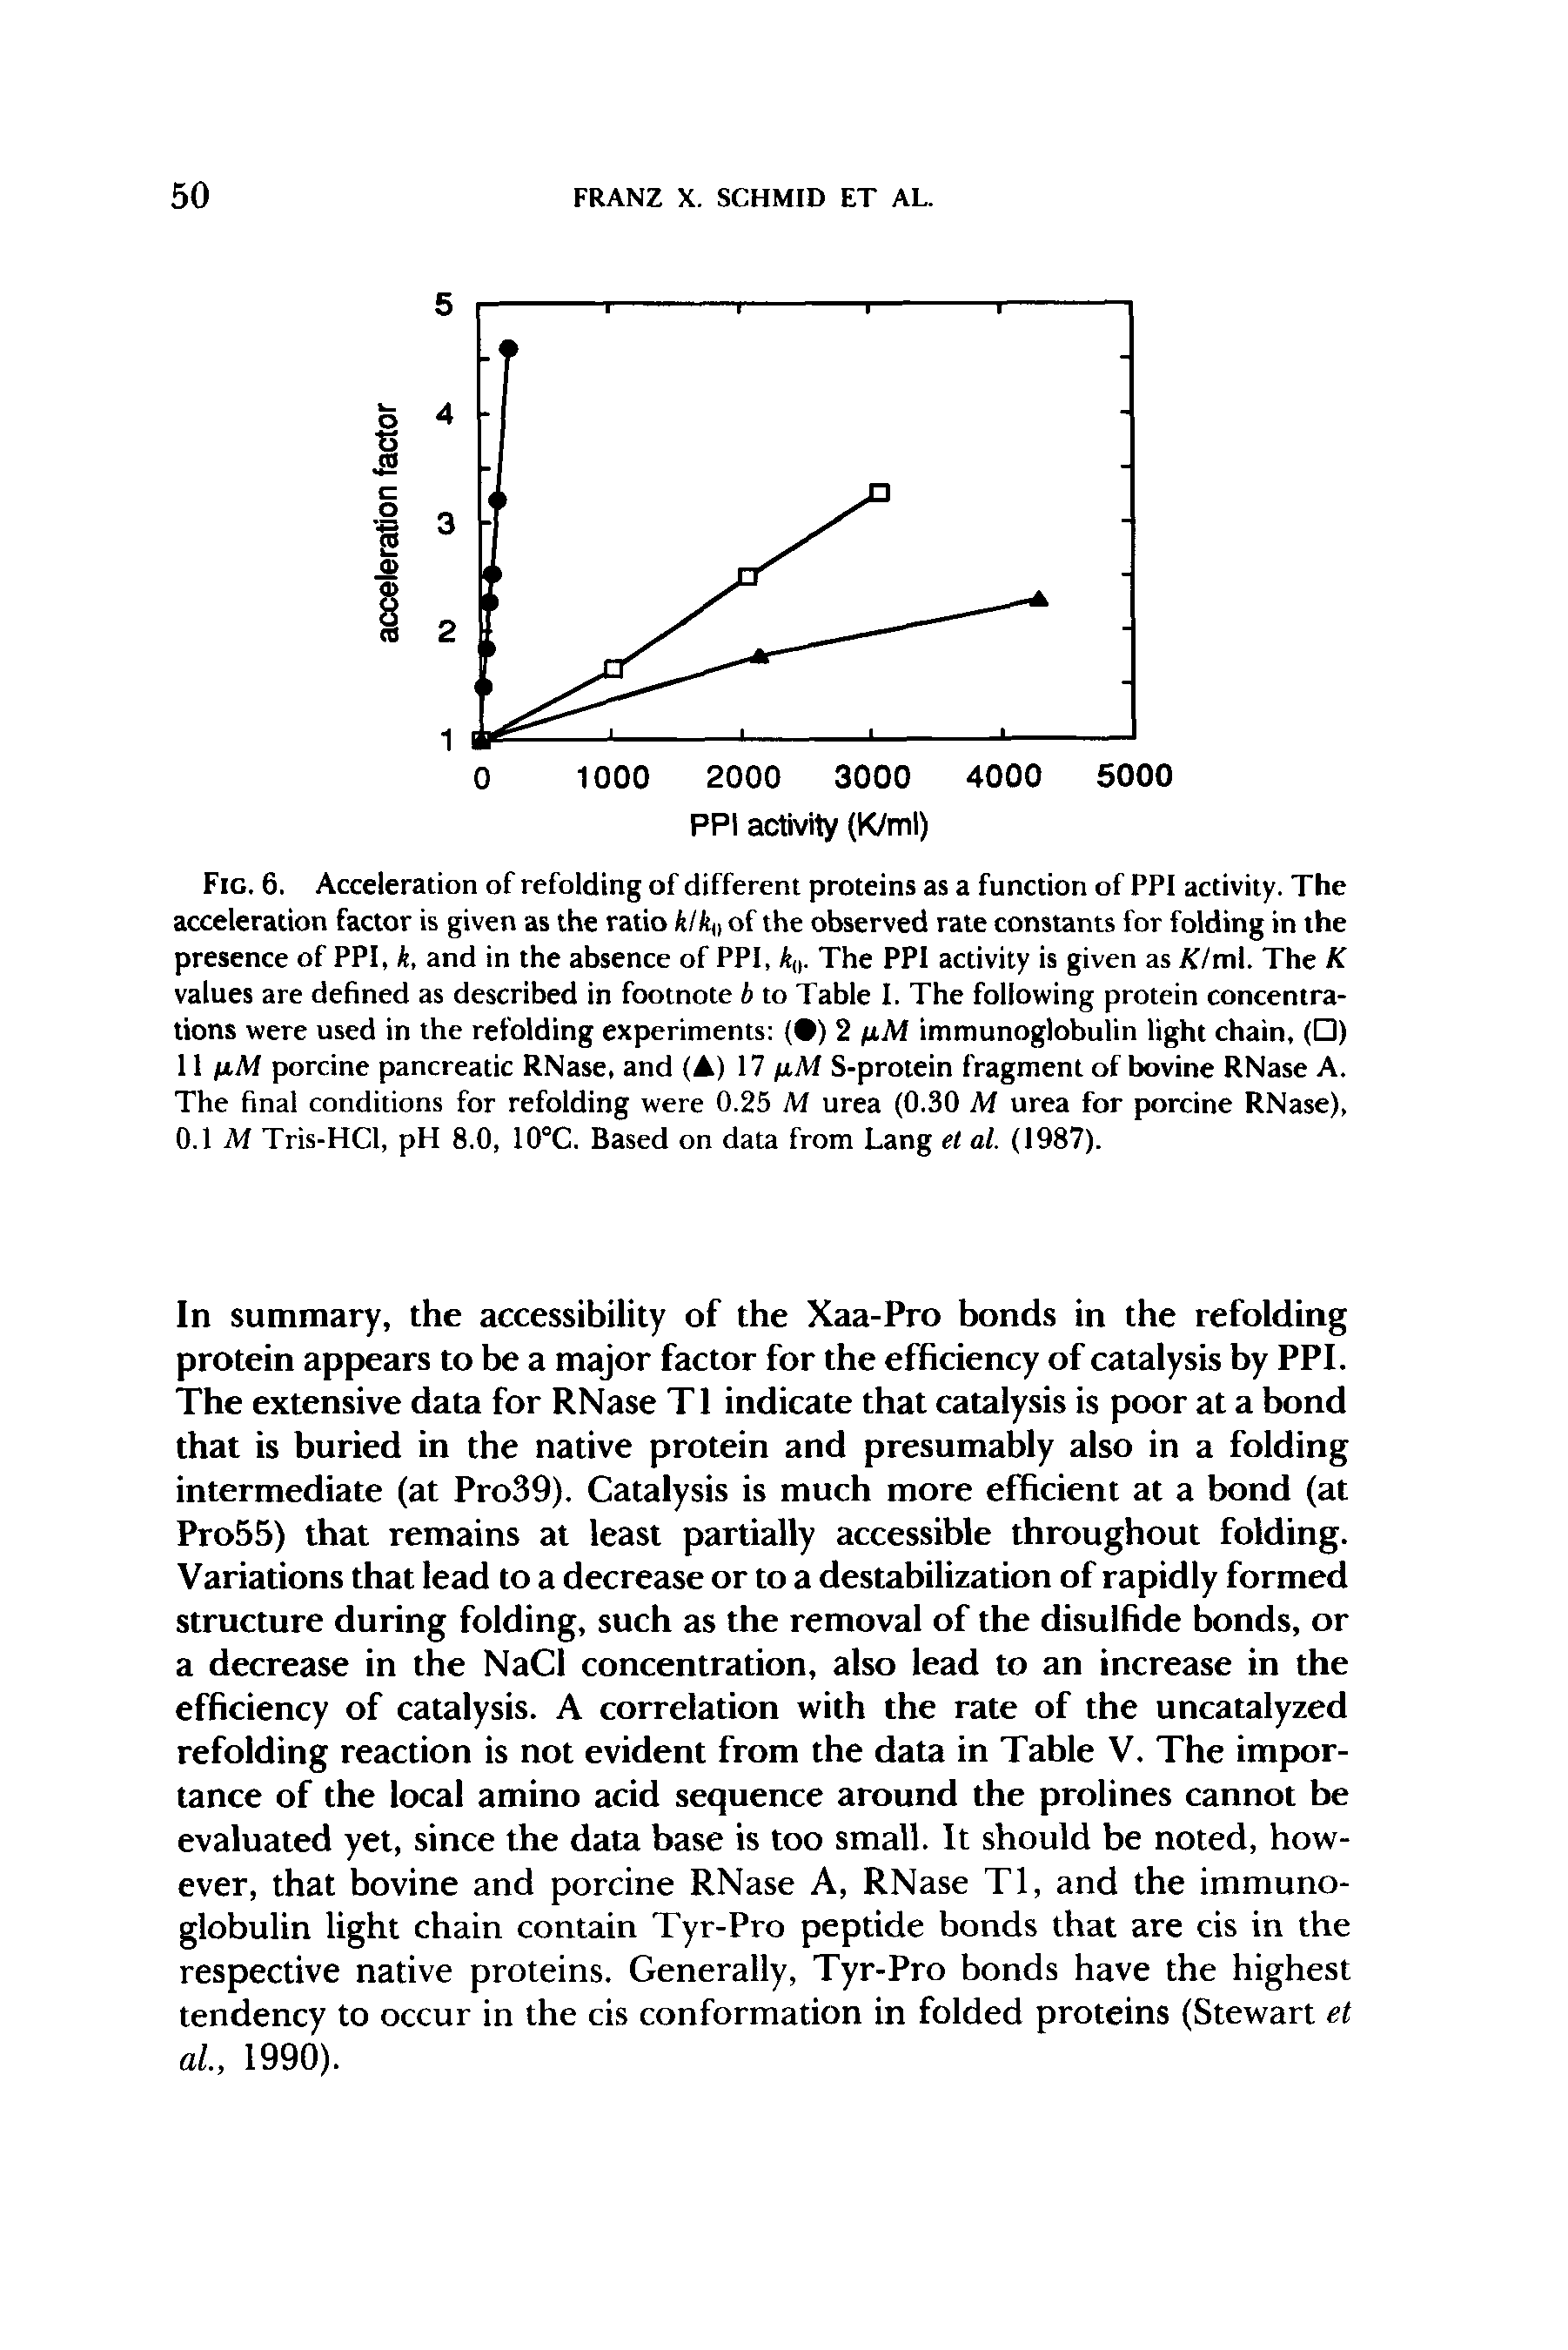 Fig. 6. Acceleration of refolding of different proteins as a function of PPI activity. The acceleration factor is given as the ratio hlk of the observed rate constants for folding in the presence of PPI, k, and in the absence of PPI, ki,. The PPI activity is given as /f/ml. The K values are defined as described in footnote b to Table I. The following protein concentrations were used in the refolding experiments ( ) 2 /iM immunoglobulin light chain, ( ) 11 juAf porcine pancreatic RNase, and ( ) 17 fiM S-protein fragment of bovine RNase A. The final conditions for refolding were 0.25 M urea (0.30 M urea for porcine RNase), 0.1 Af Tris-HCl, pH 8.0, 10°C. Based on data from Lang el at. (1987).